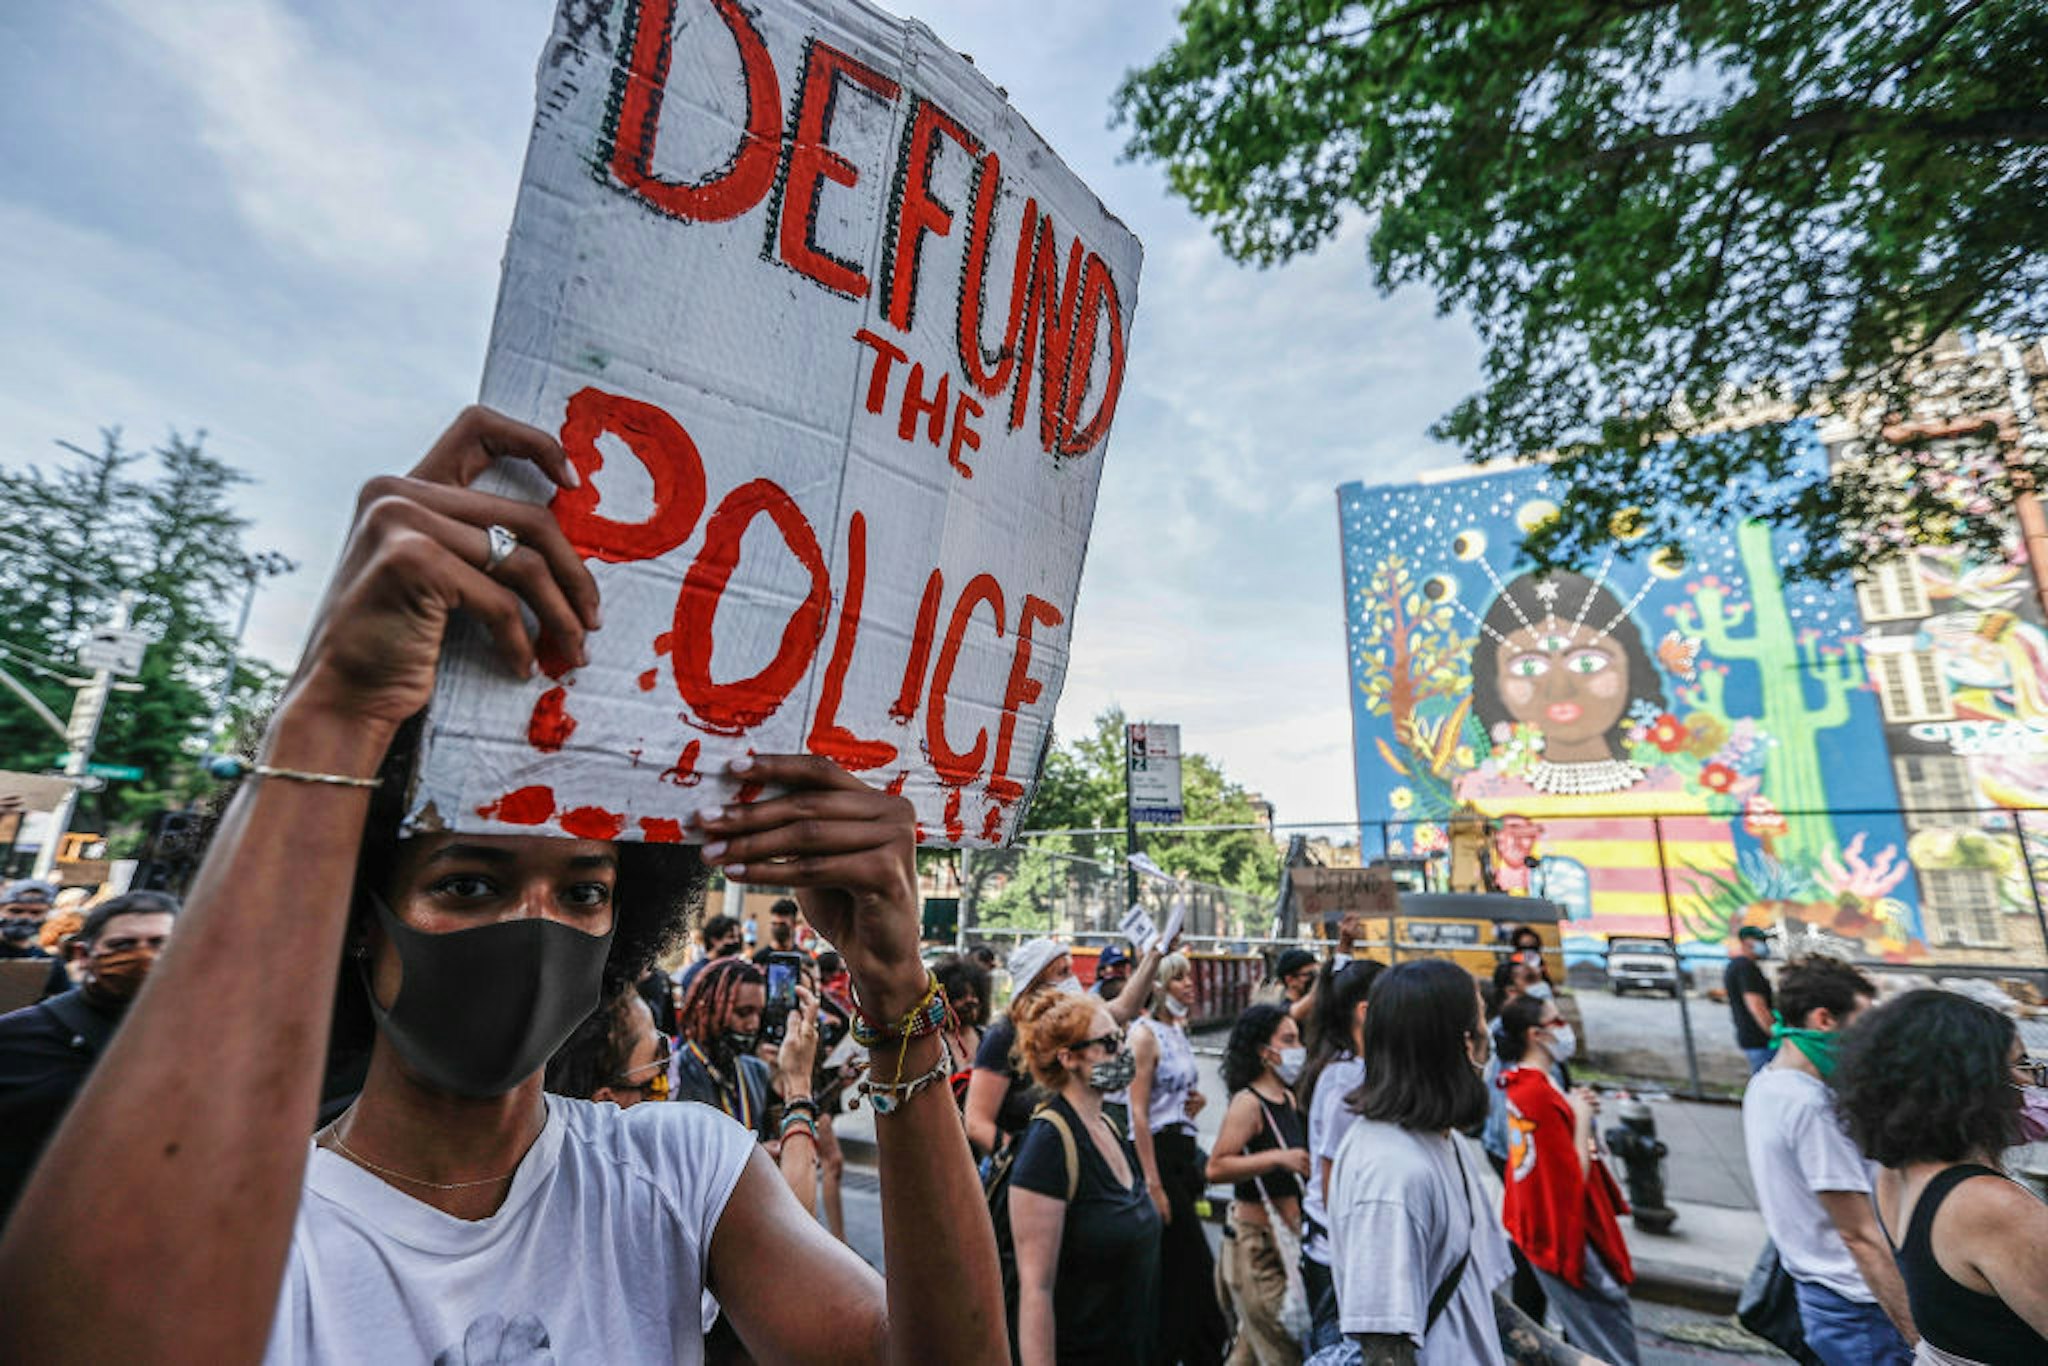 A demonstrator holds a placard during the protest. Protests continue against police brutality and racial injustice in New York City.